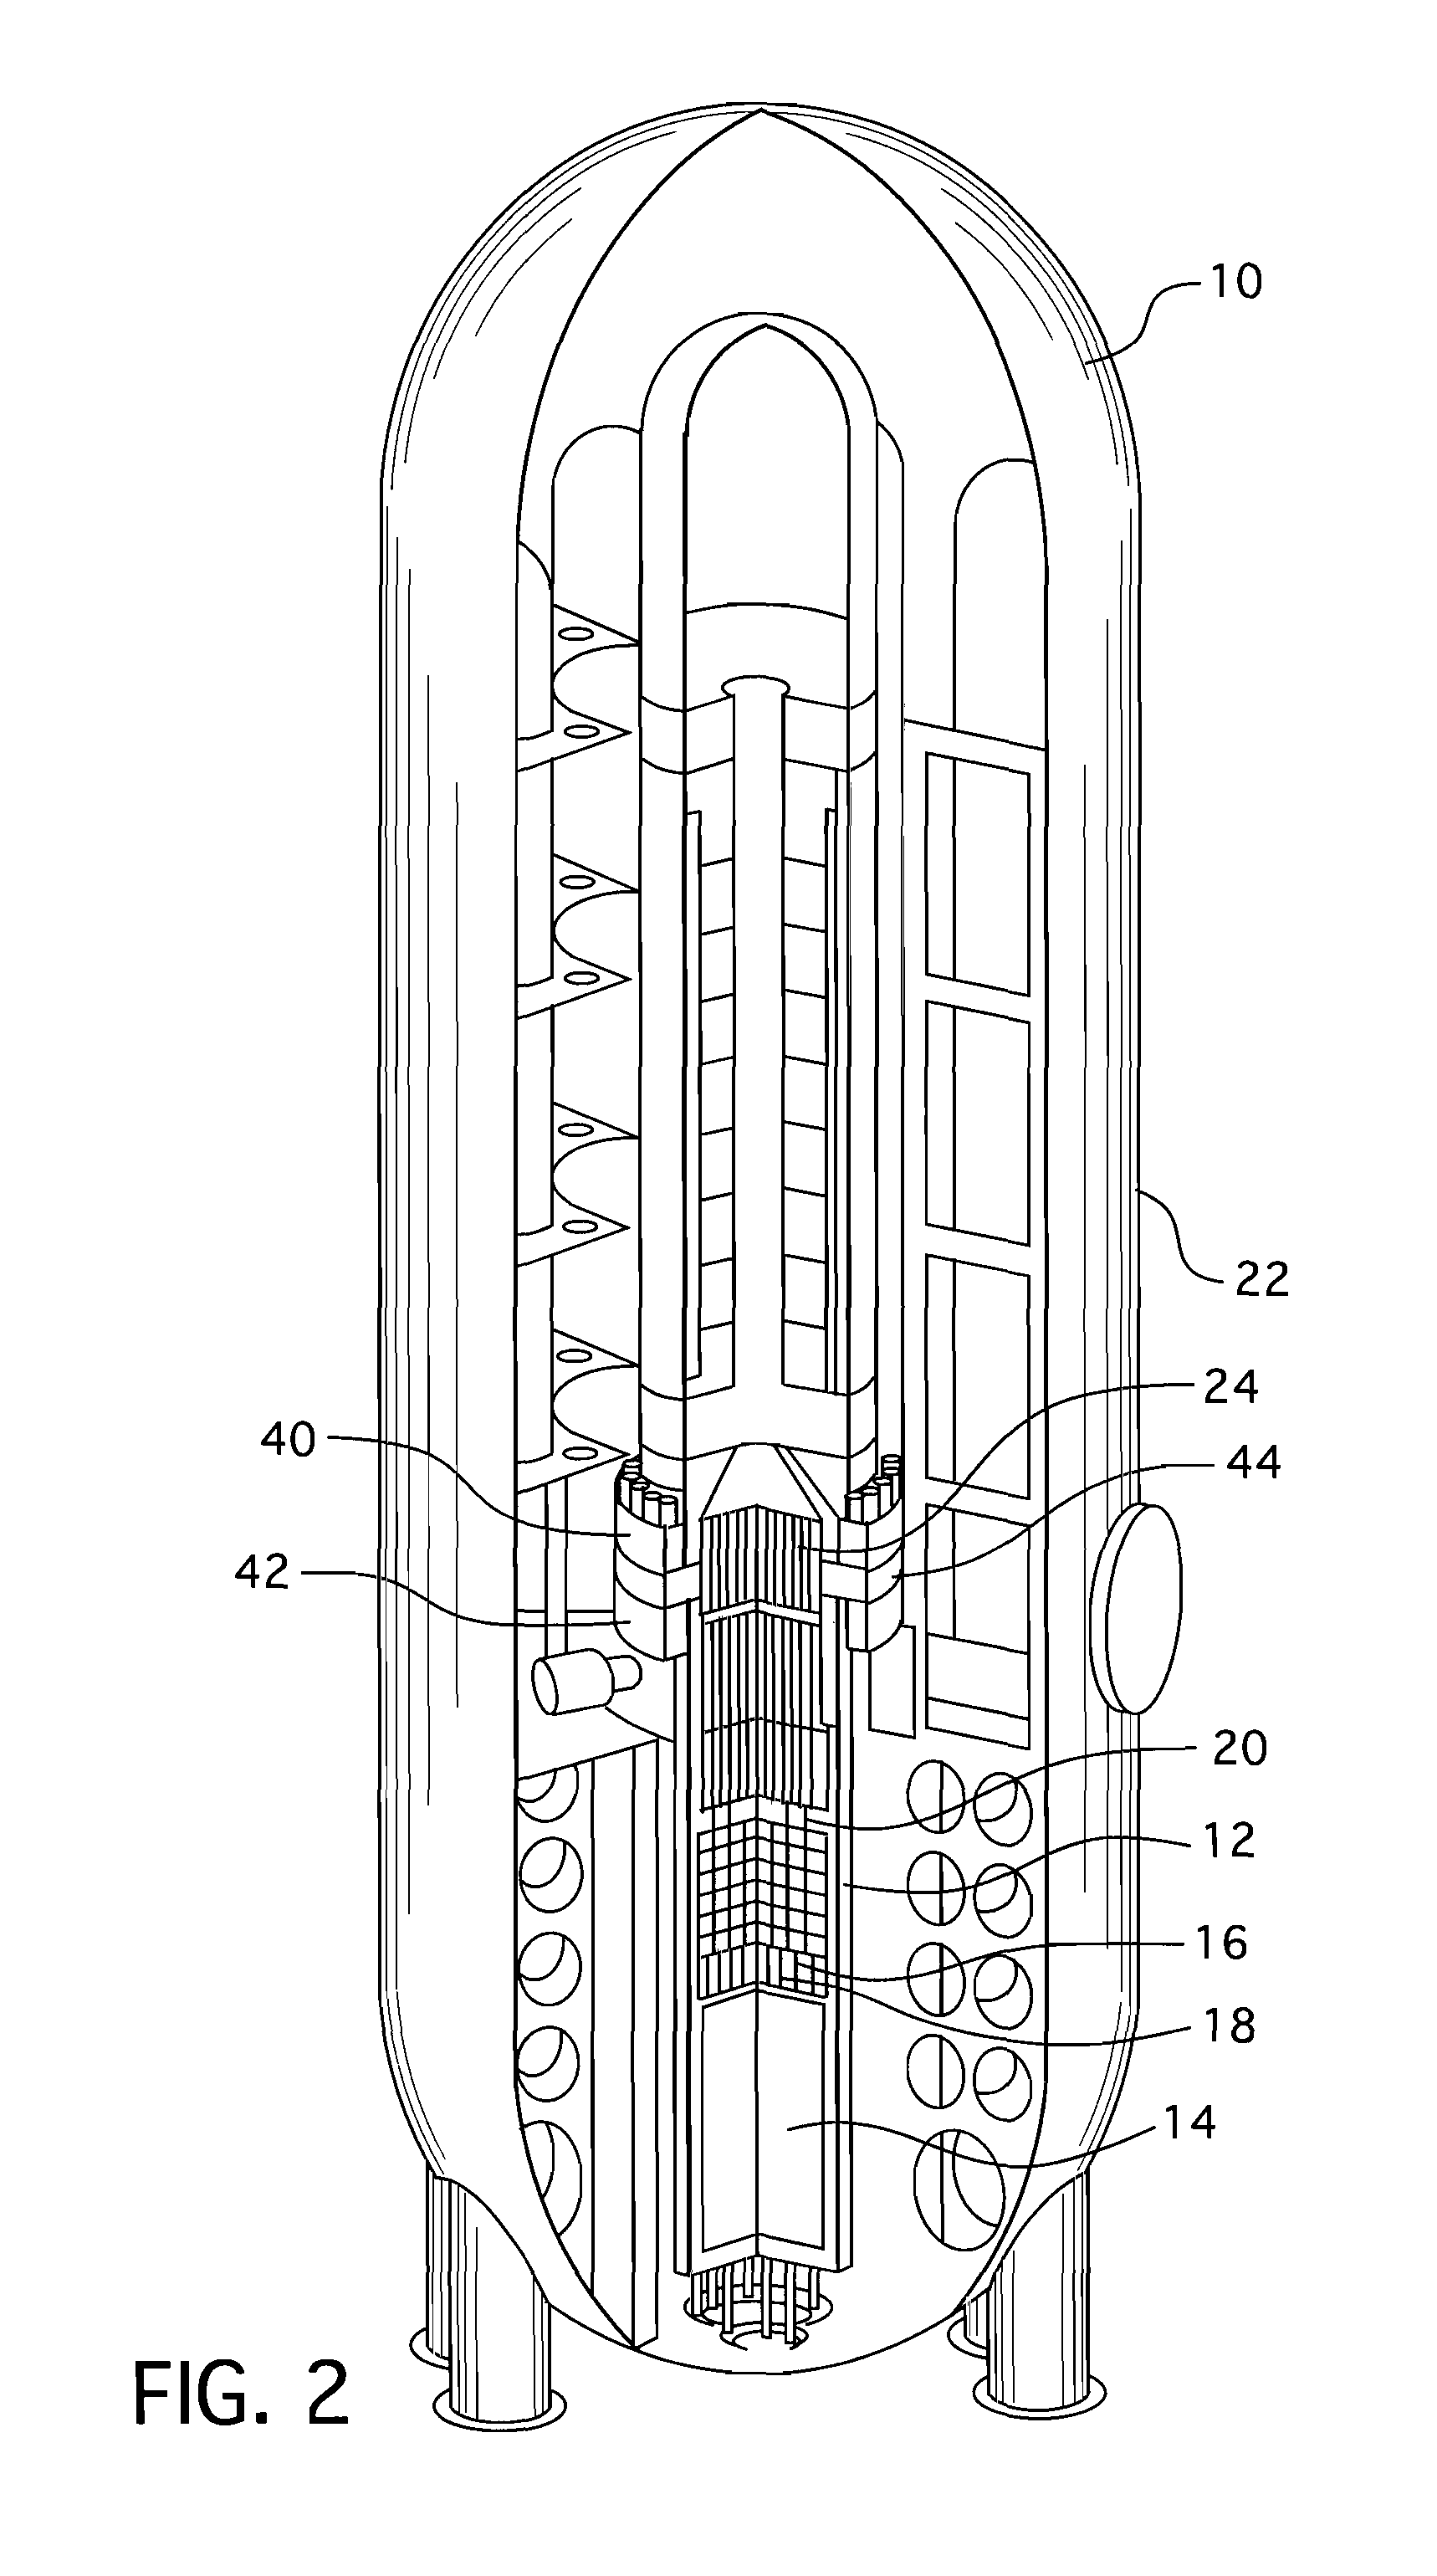 Instrumentation and control penetration flange for pressurized water reactor